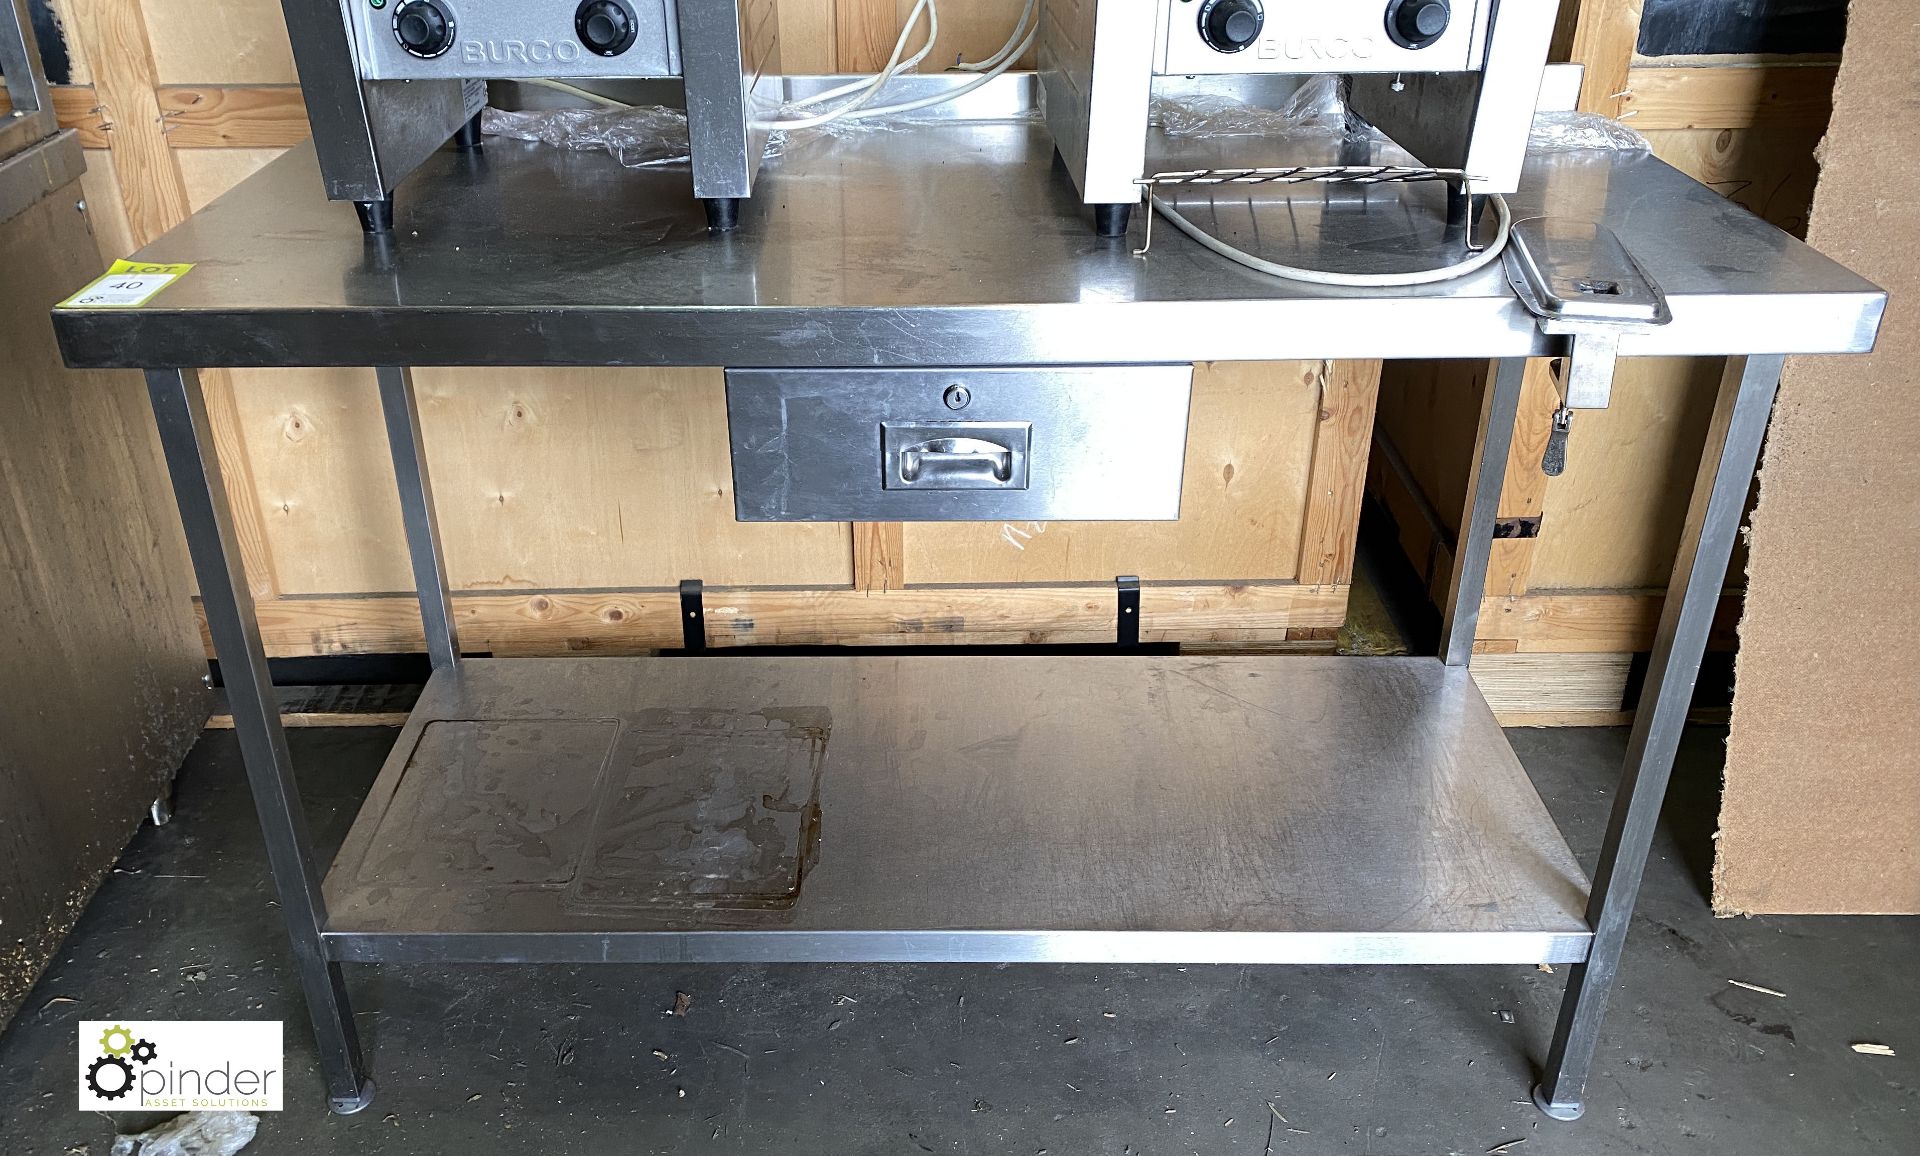 Stainless steel Preparation Table, 1400mm x 650mm x 890mm high, with undershelf, utensil drawer